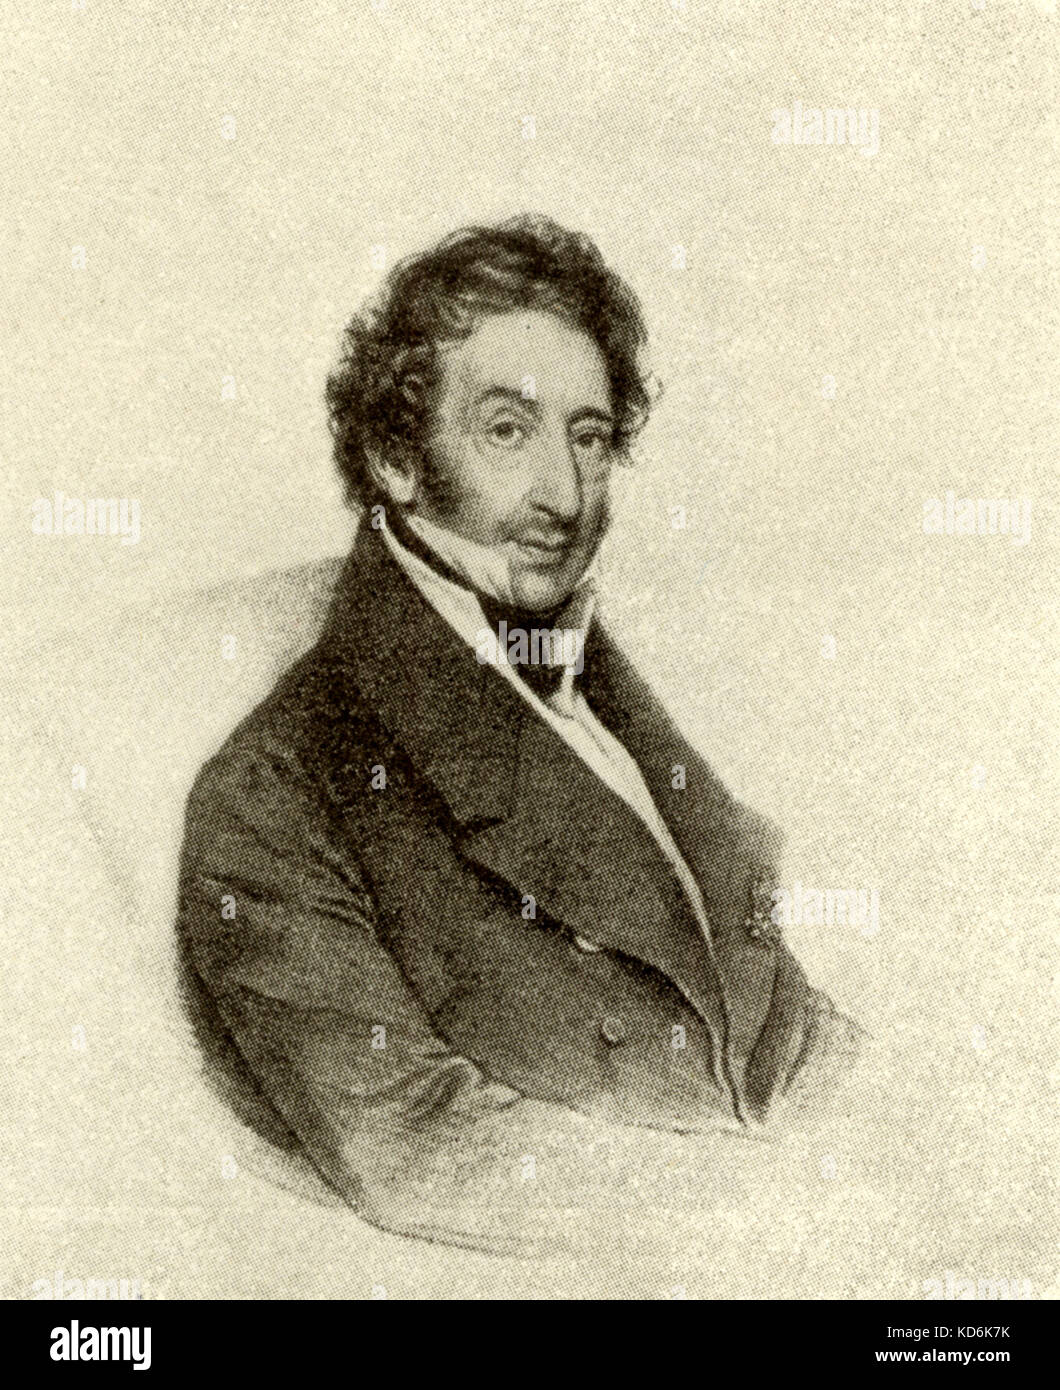 Dr. Johann von Malfatti, one of Beethoven's doctors at the time of his final illness. Lithograph by Kriehuber.  German composer, 1770-1827. Stock Photo